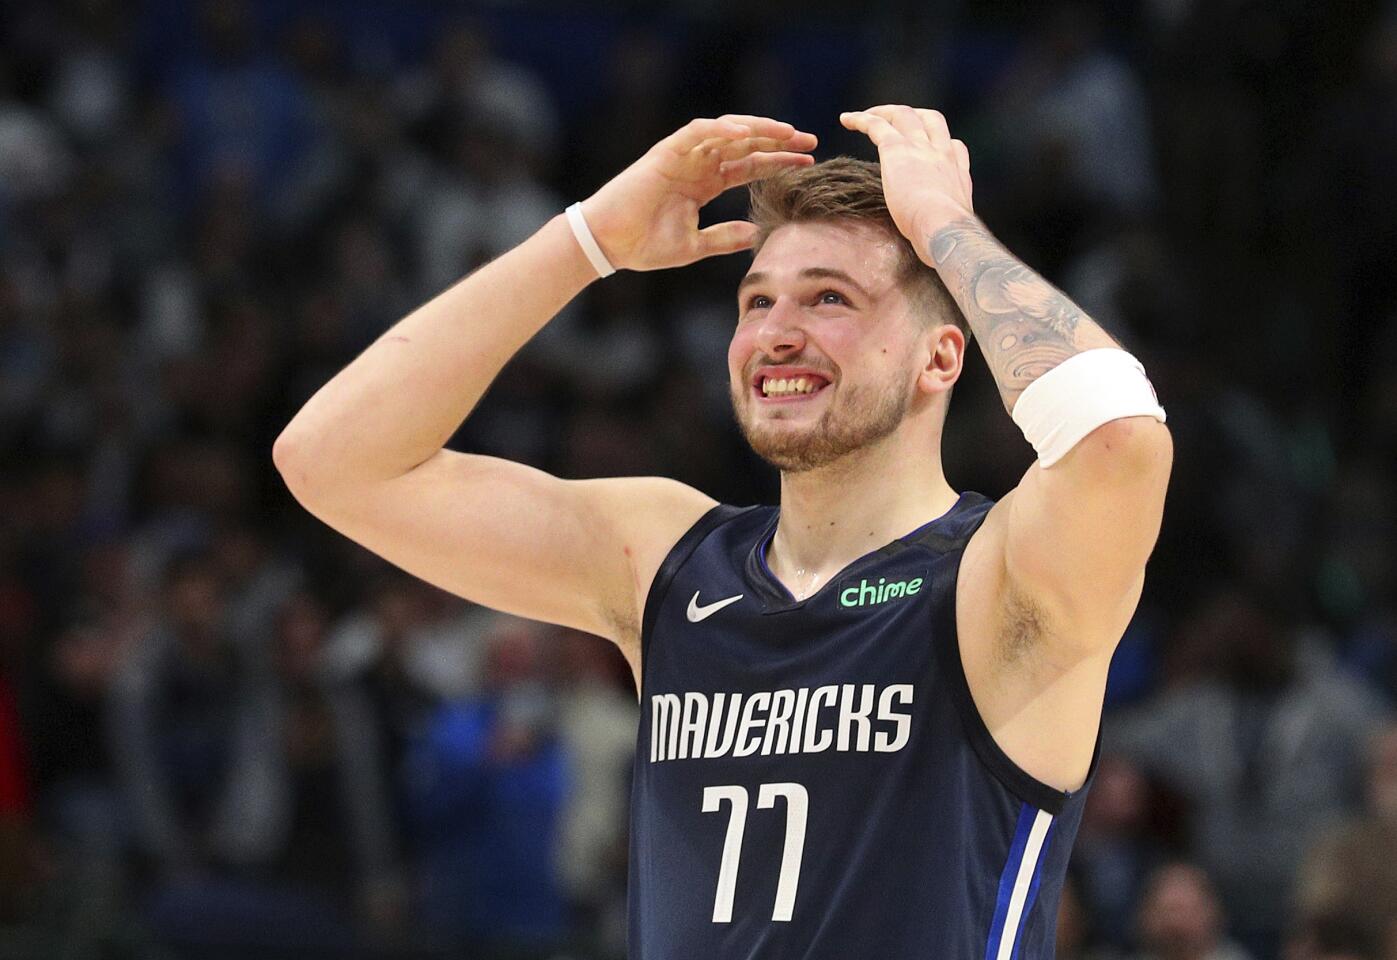 Mavericks forward Luka Doncic reacts after missing a three-pointer late in a game against the Clippers on Jan. 21.